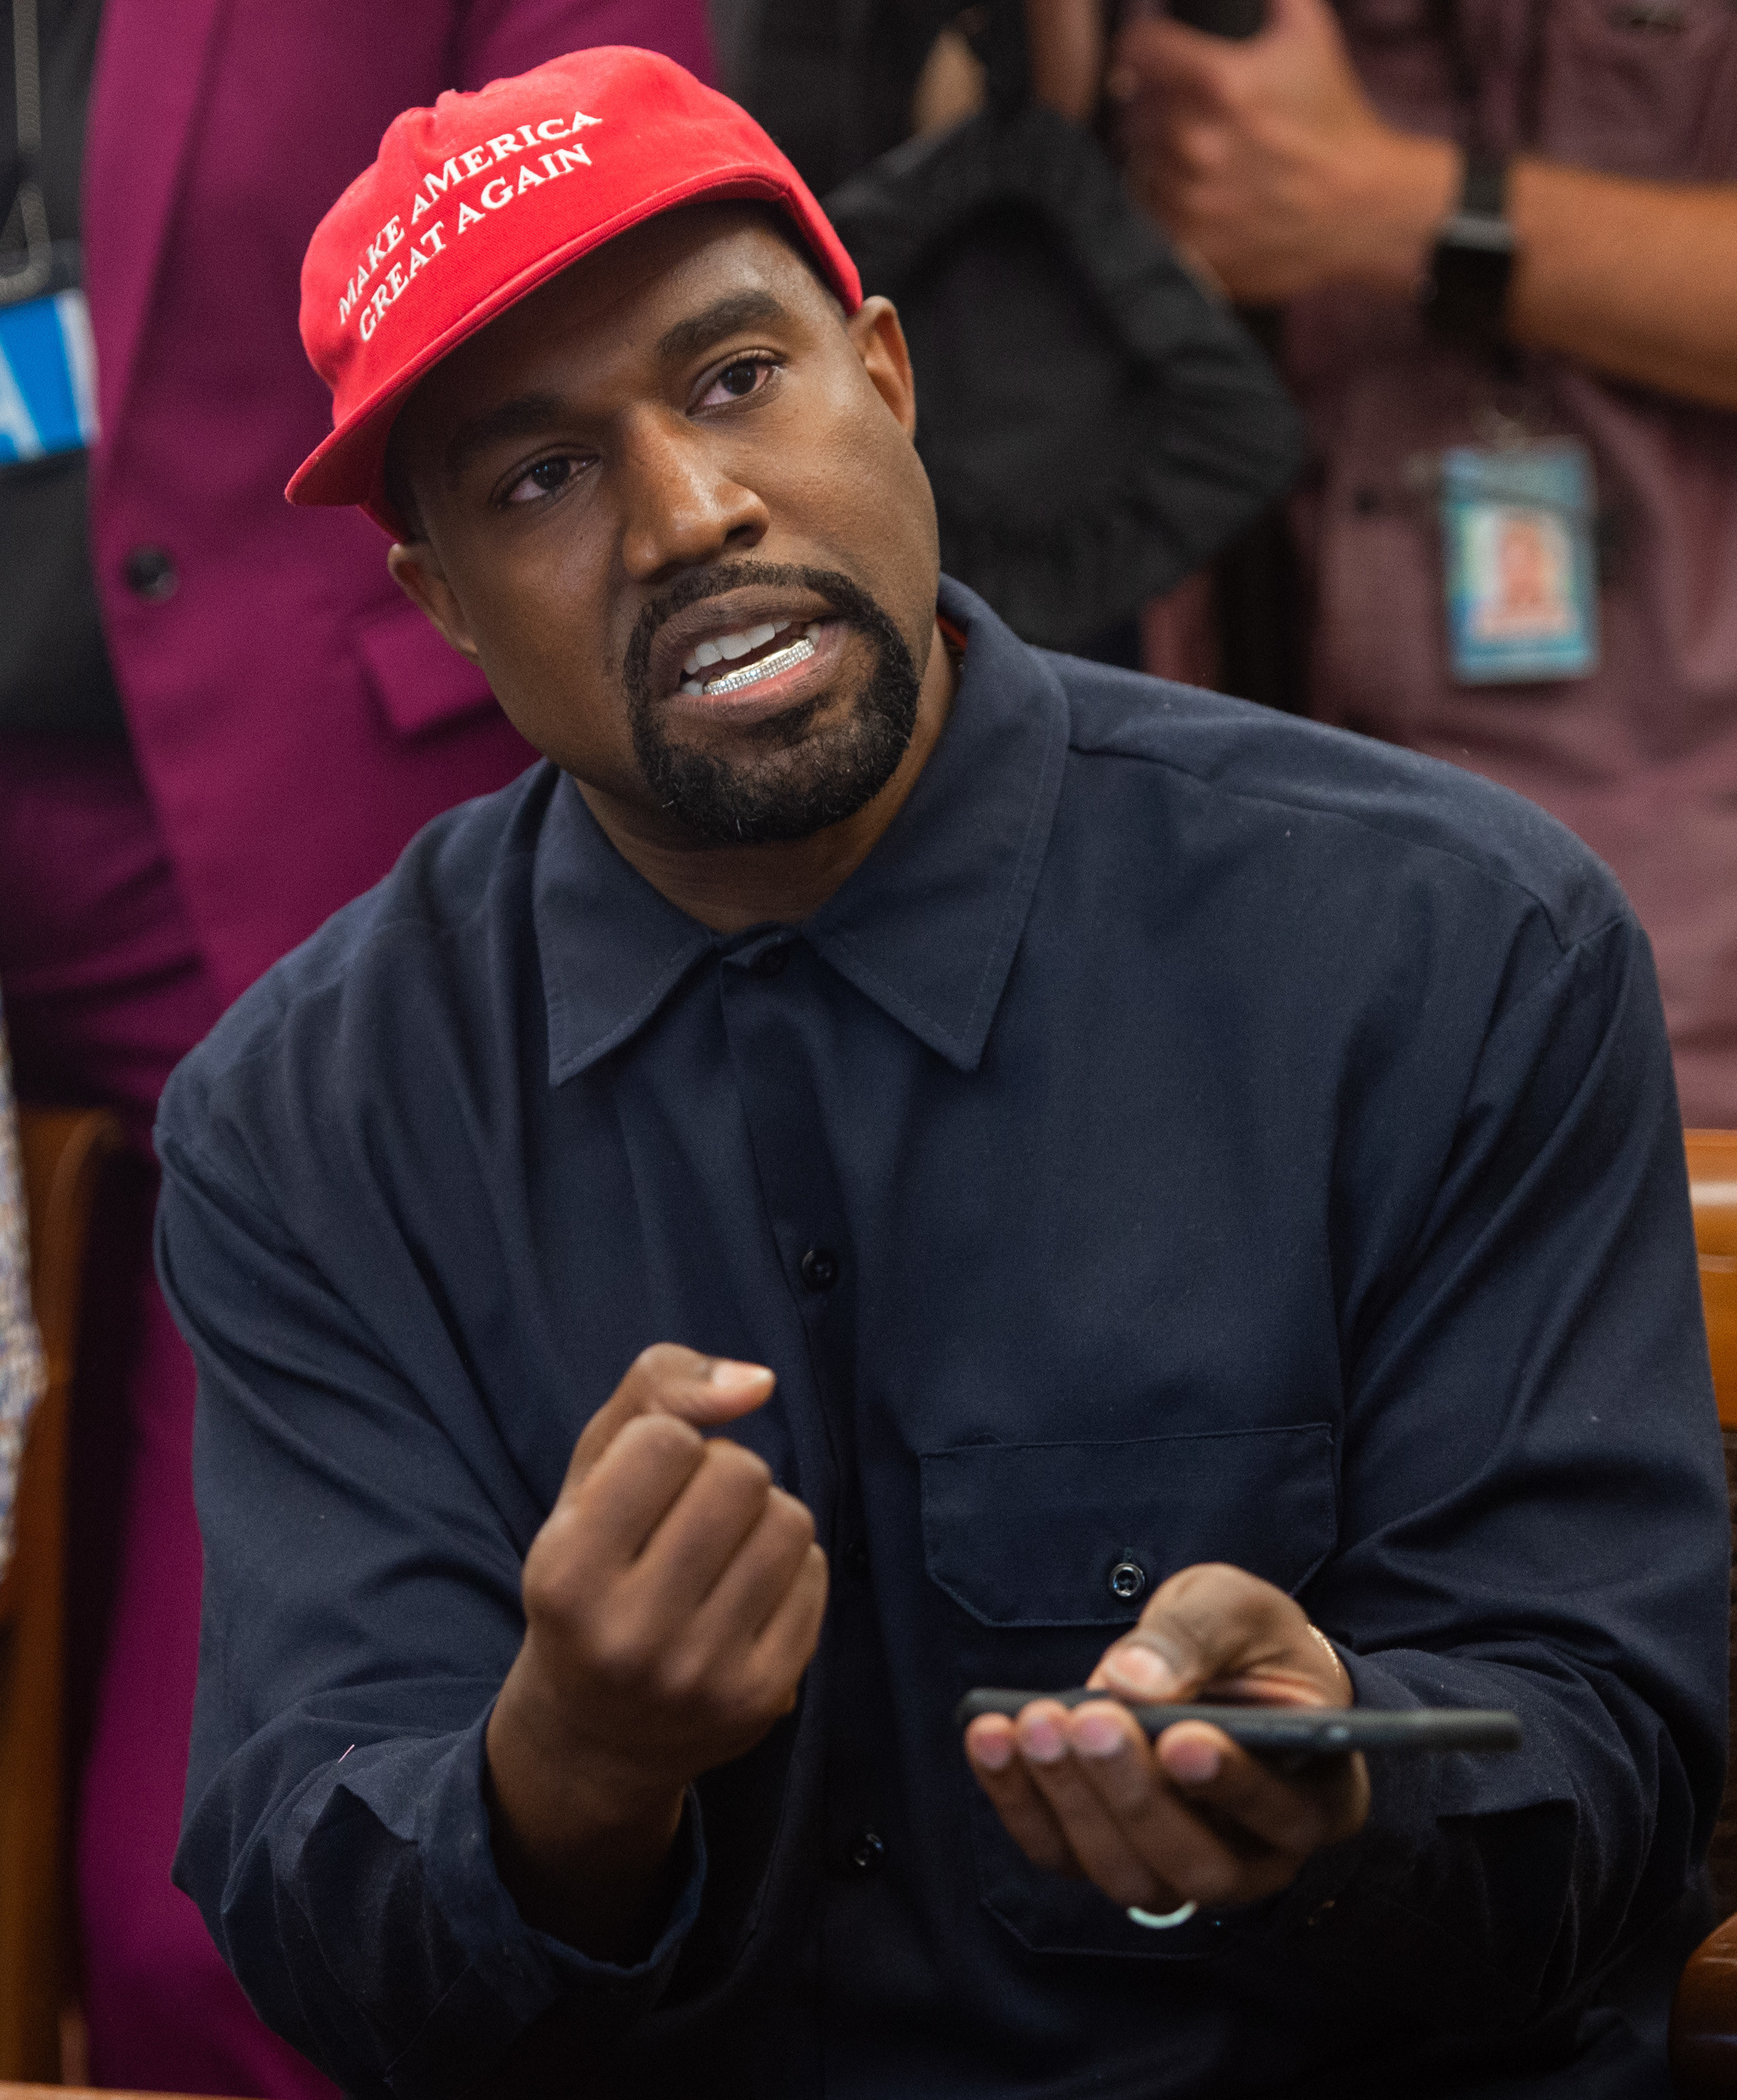 kanye with a maga hat and phone in hand